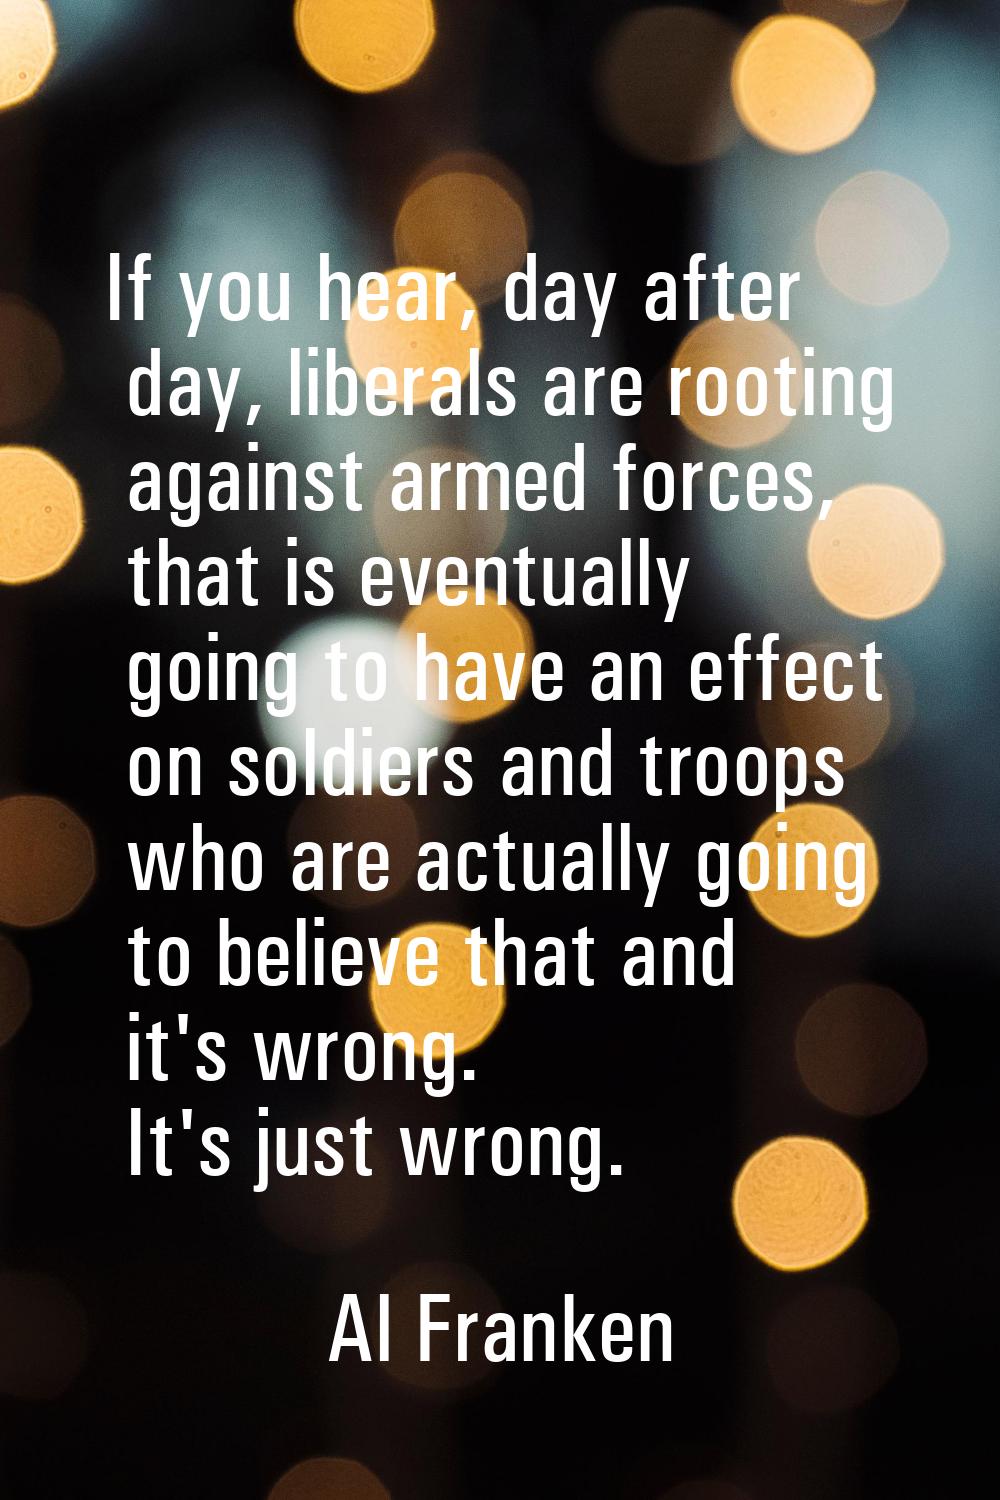 If you hear, day after day, liberals are rooting against armed forces, that is eventually going to 